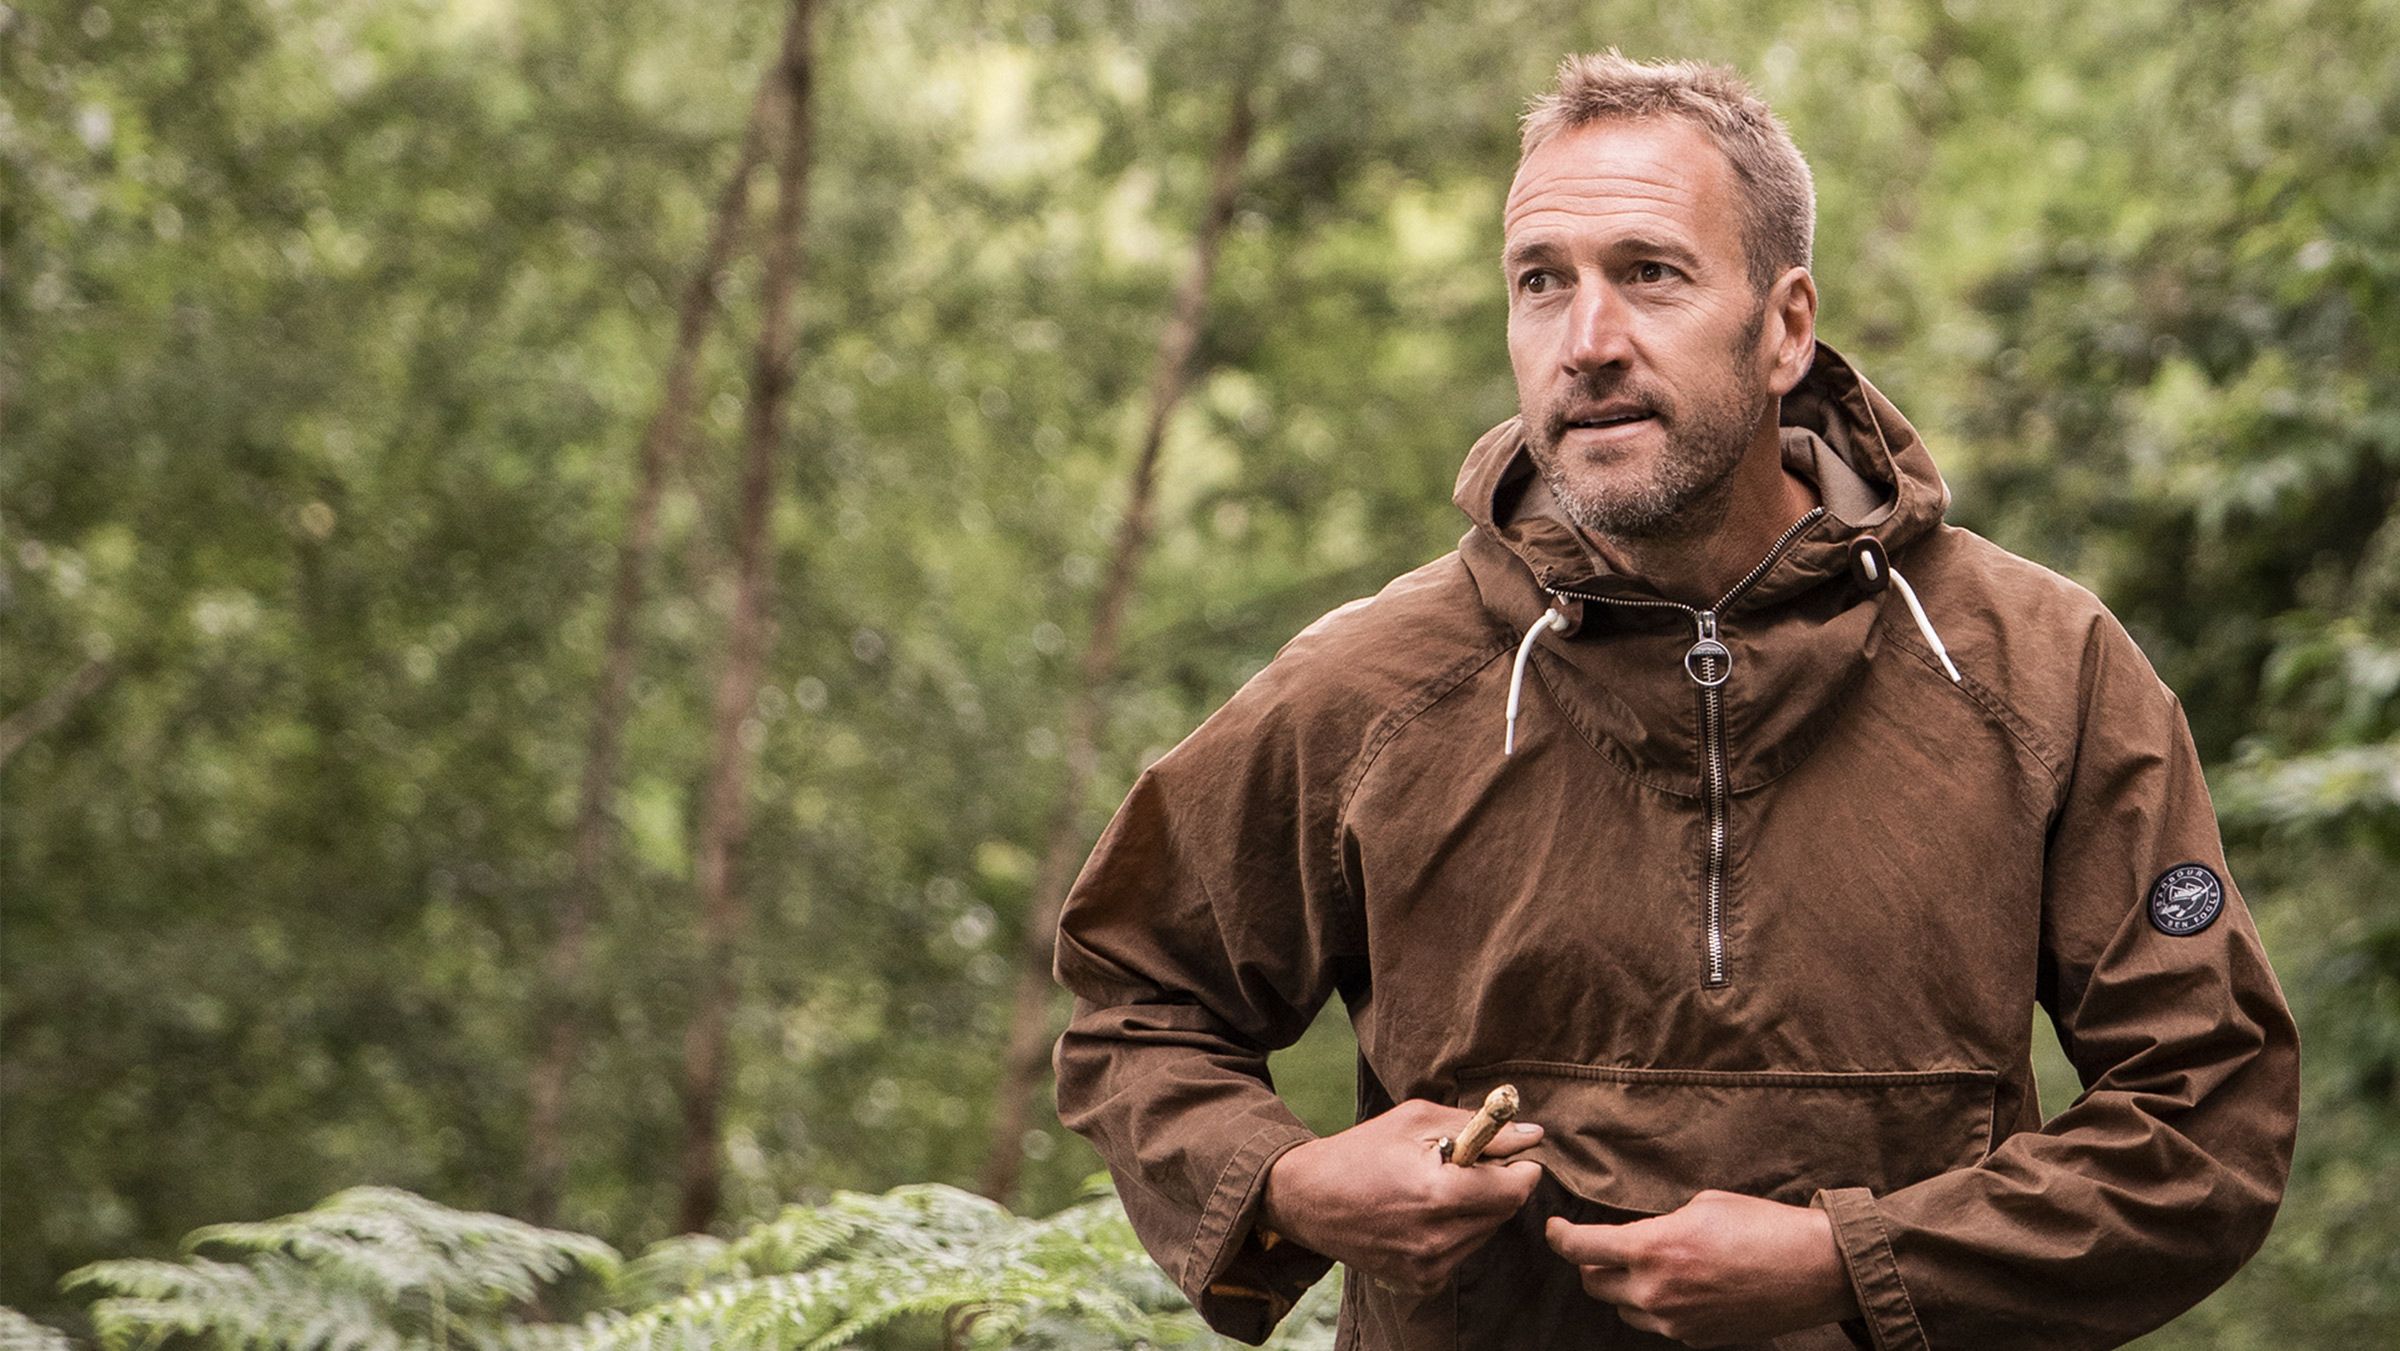 In the wilderness with Ben Fogle